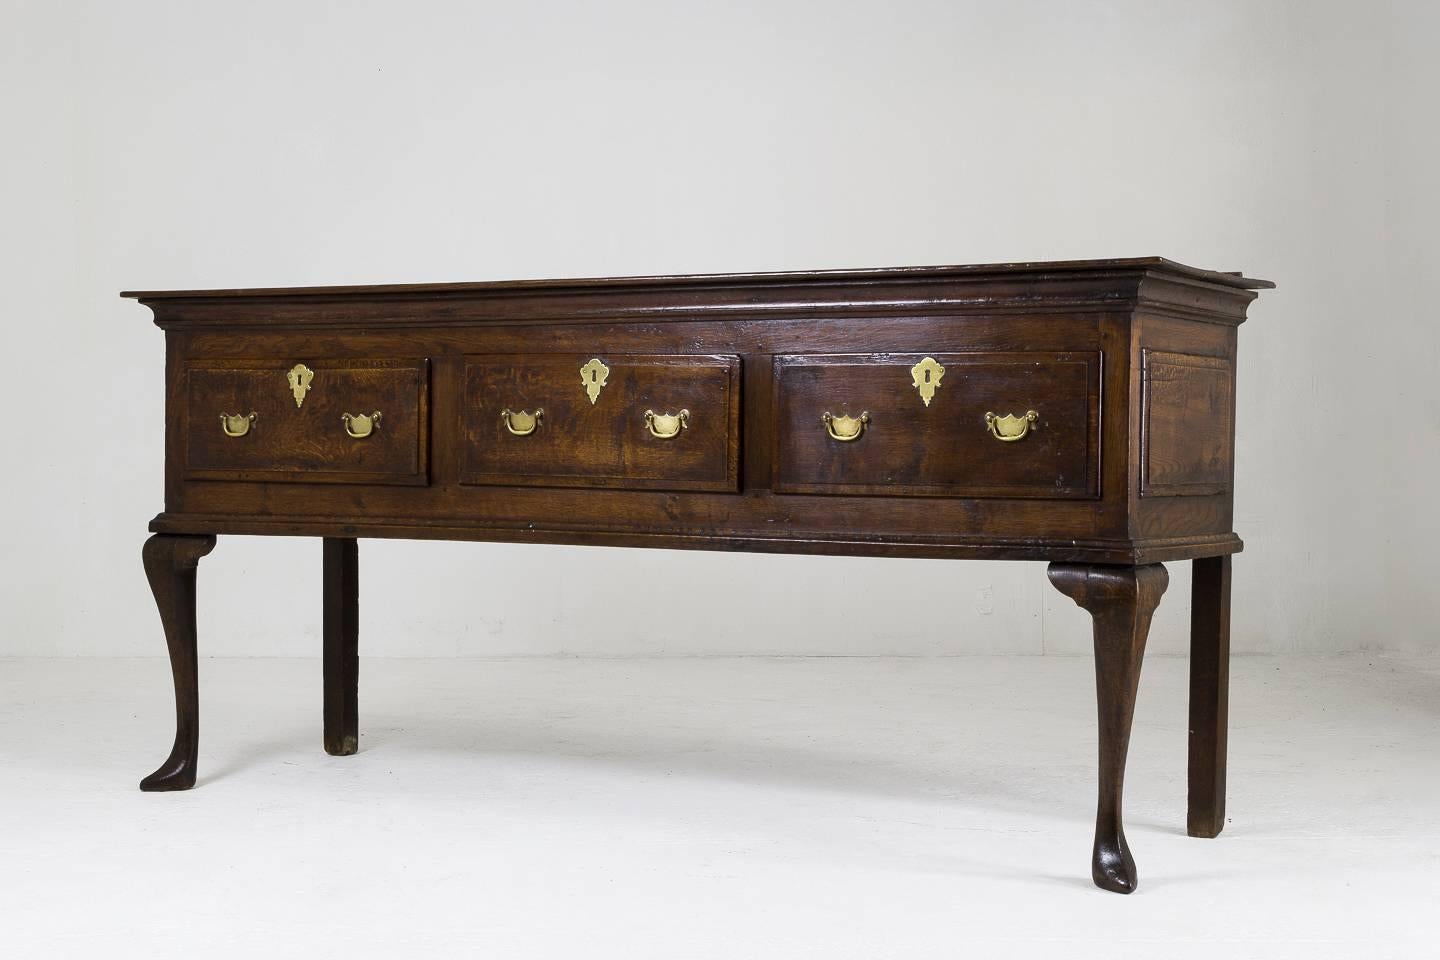 18th century English Oak dresser base, good color and proportions. Fitting nicely into a contemporary interior.